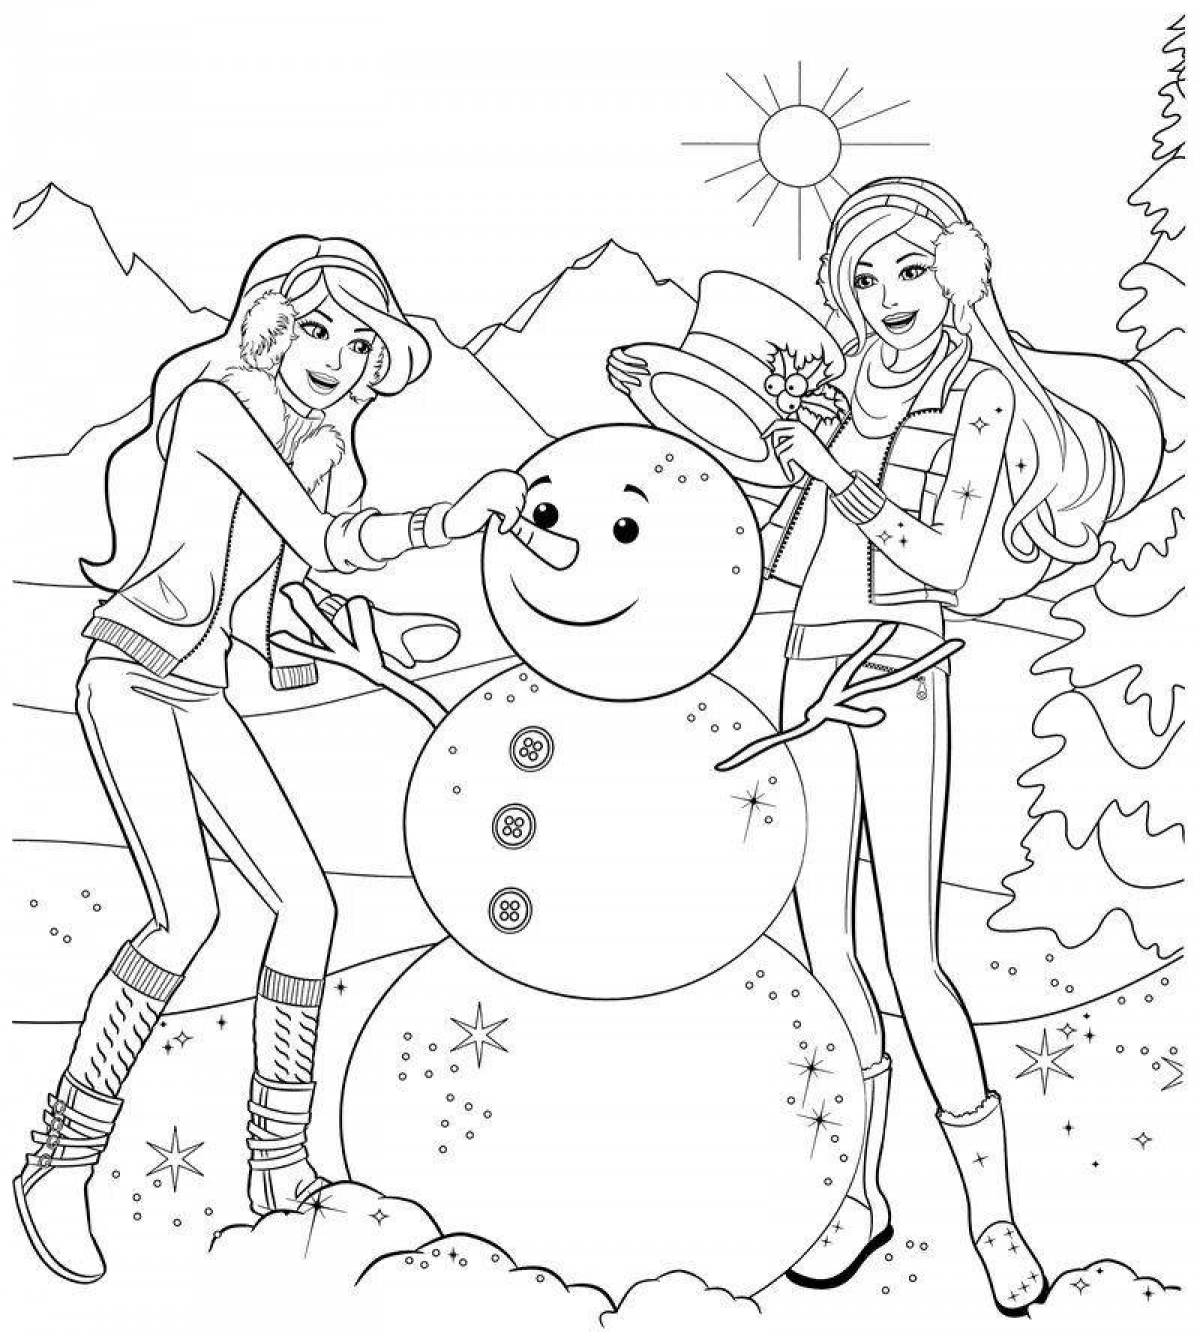 Cheerful winter coloring for girls